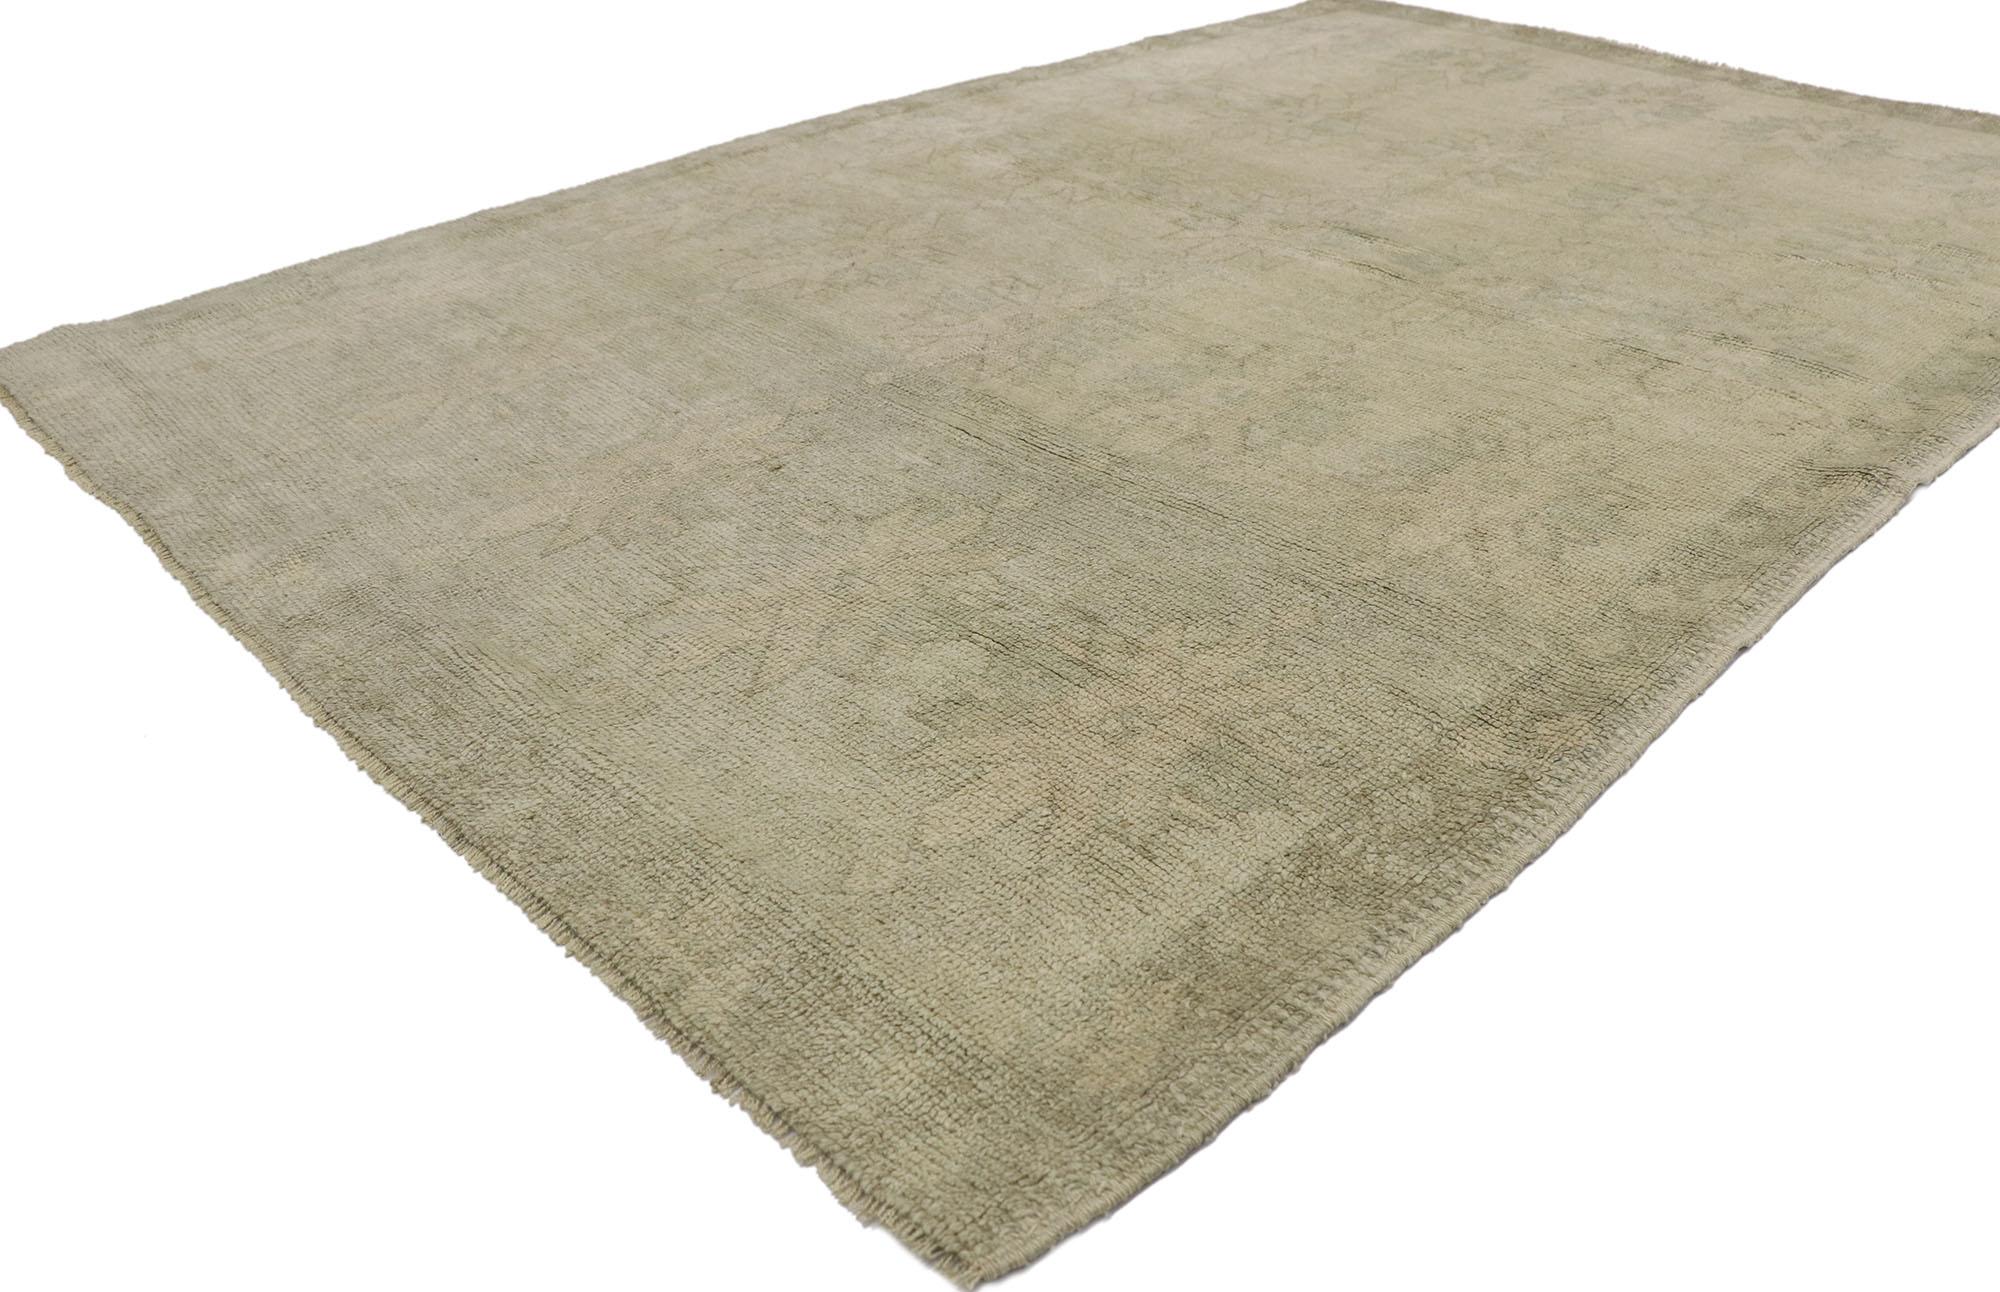 53619 Vintage Turkish Oushak rug 04'08 x 07'00. Cleverly composed with understated elegance in neutral colors, this hand knotted wool vintage Turkish Oushak rug will take on a curated lived-in look that feels timeless while imparting a sense of